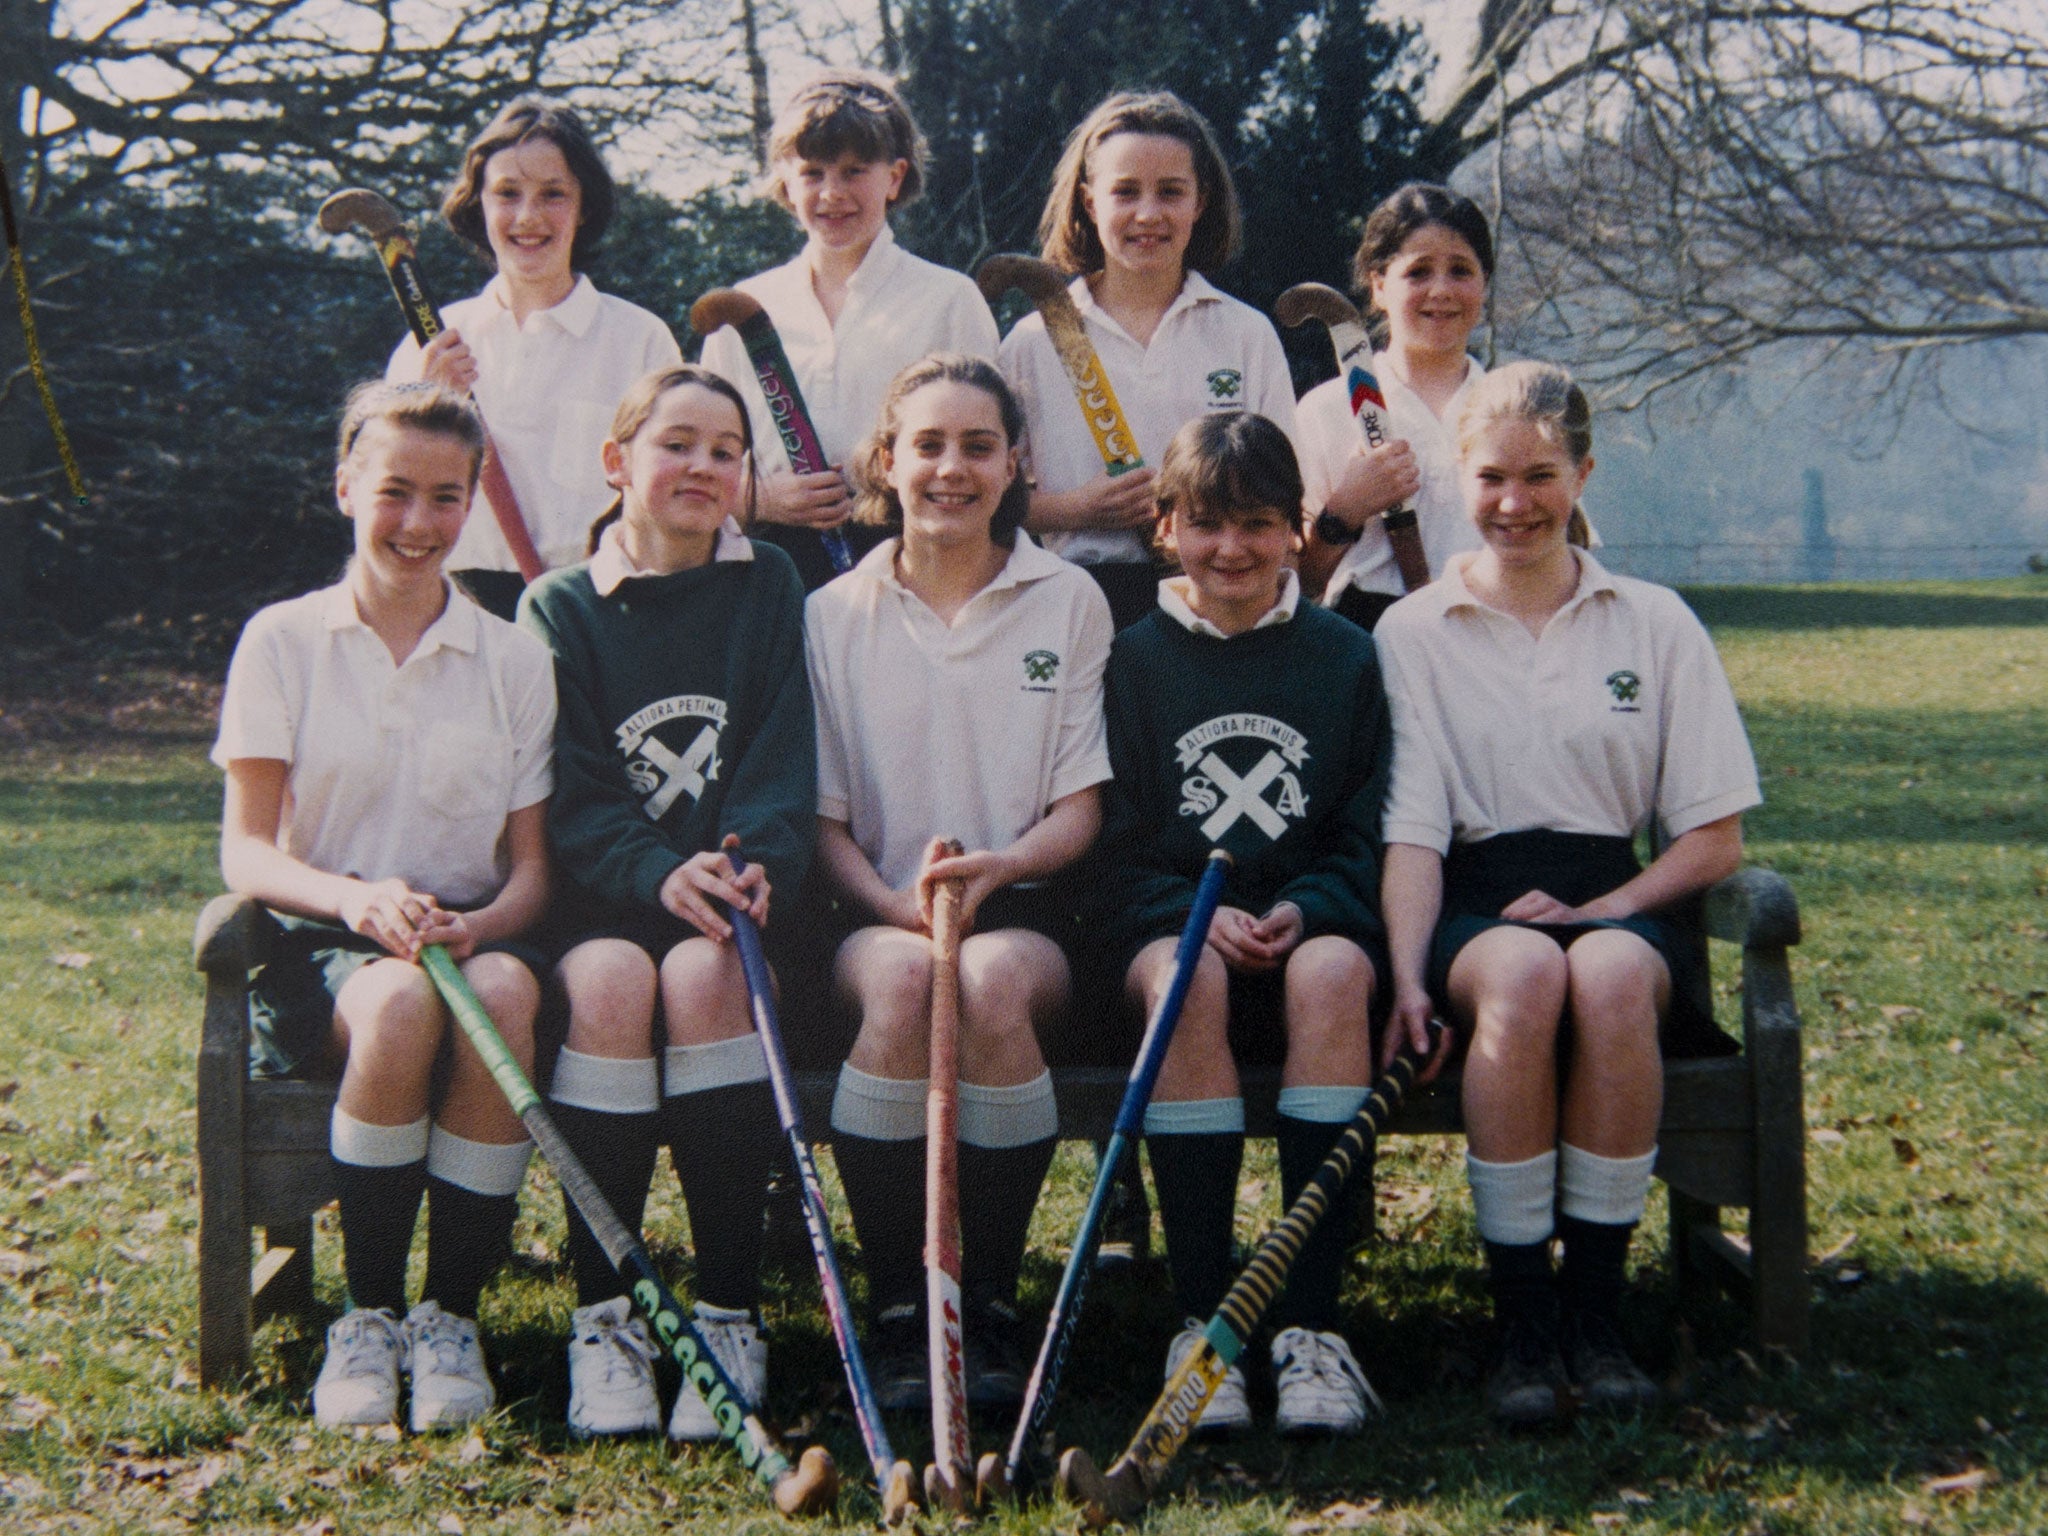 Kate Middleton (front row, centre) in a hockey team during her time at St Andrew's School in Berkshire